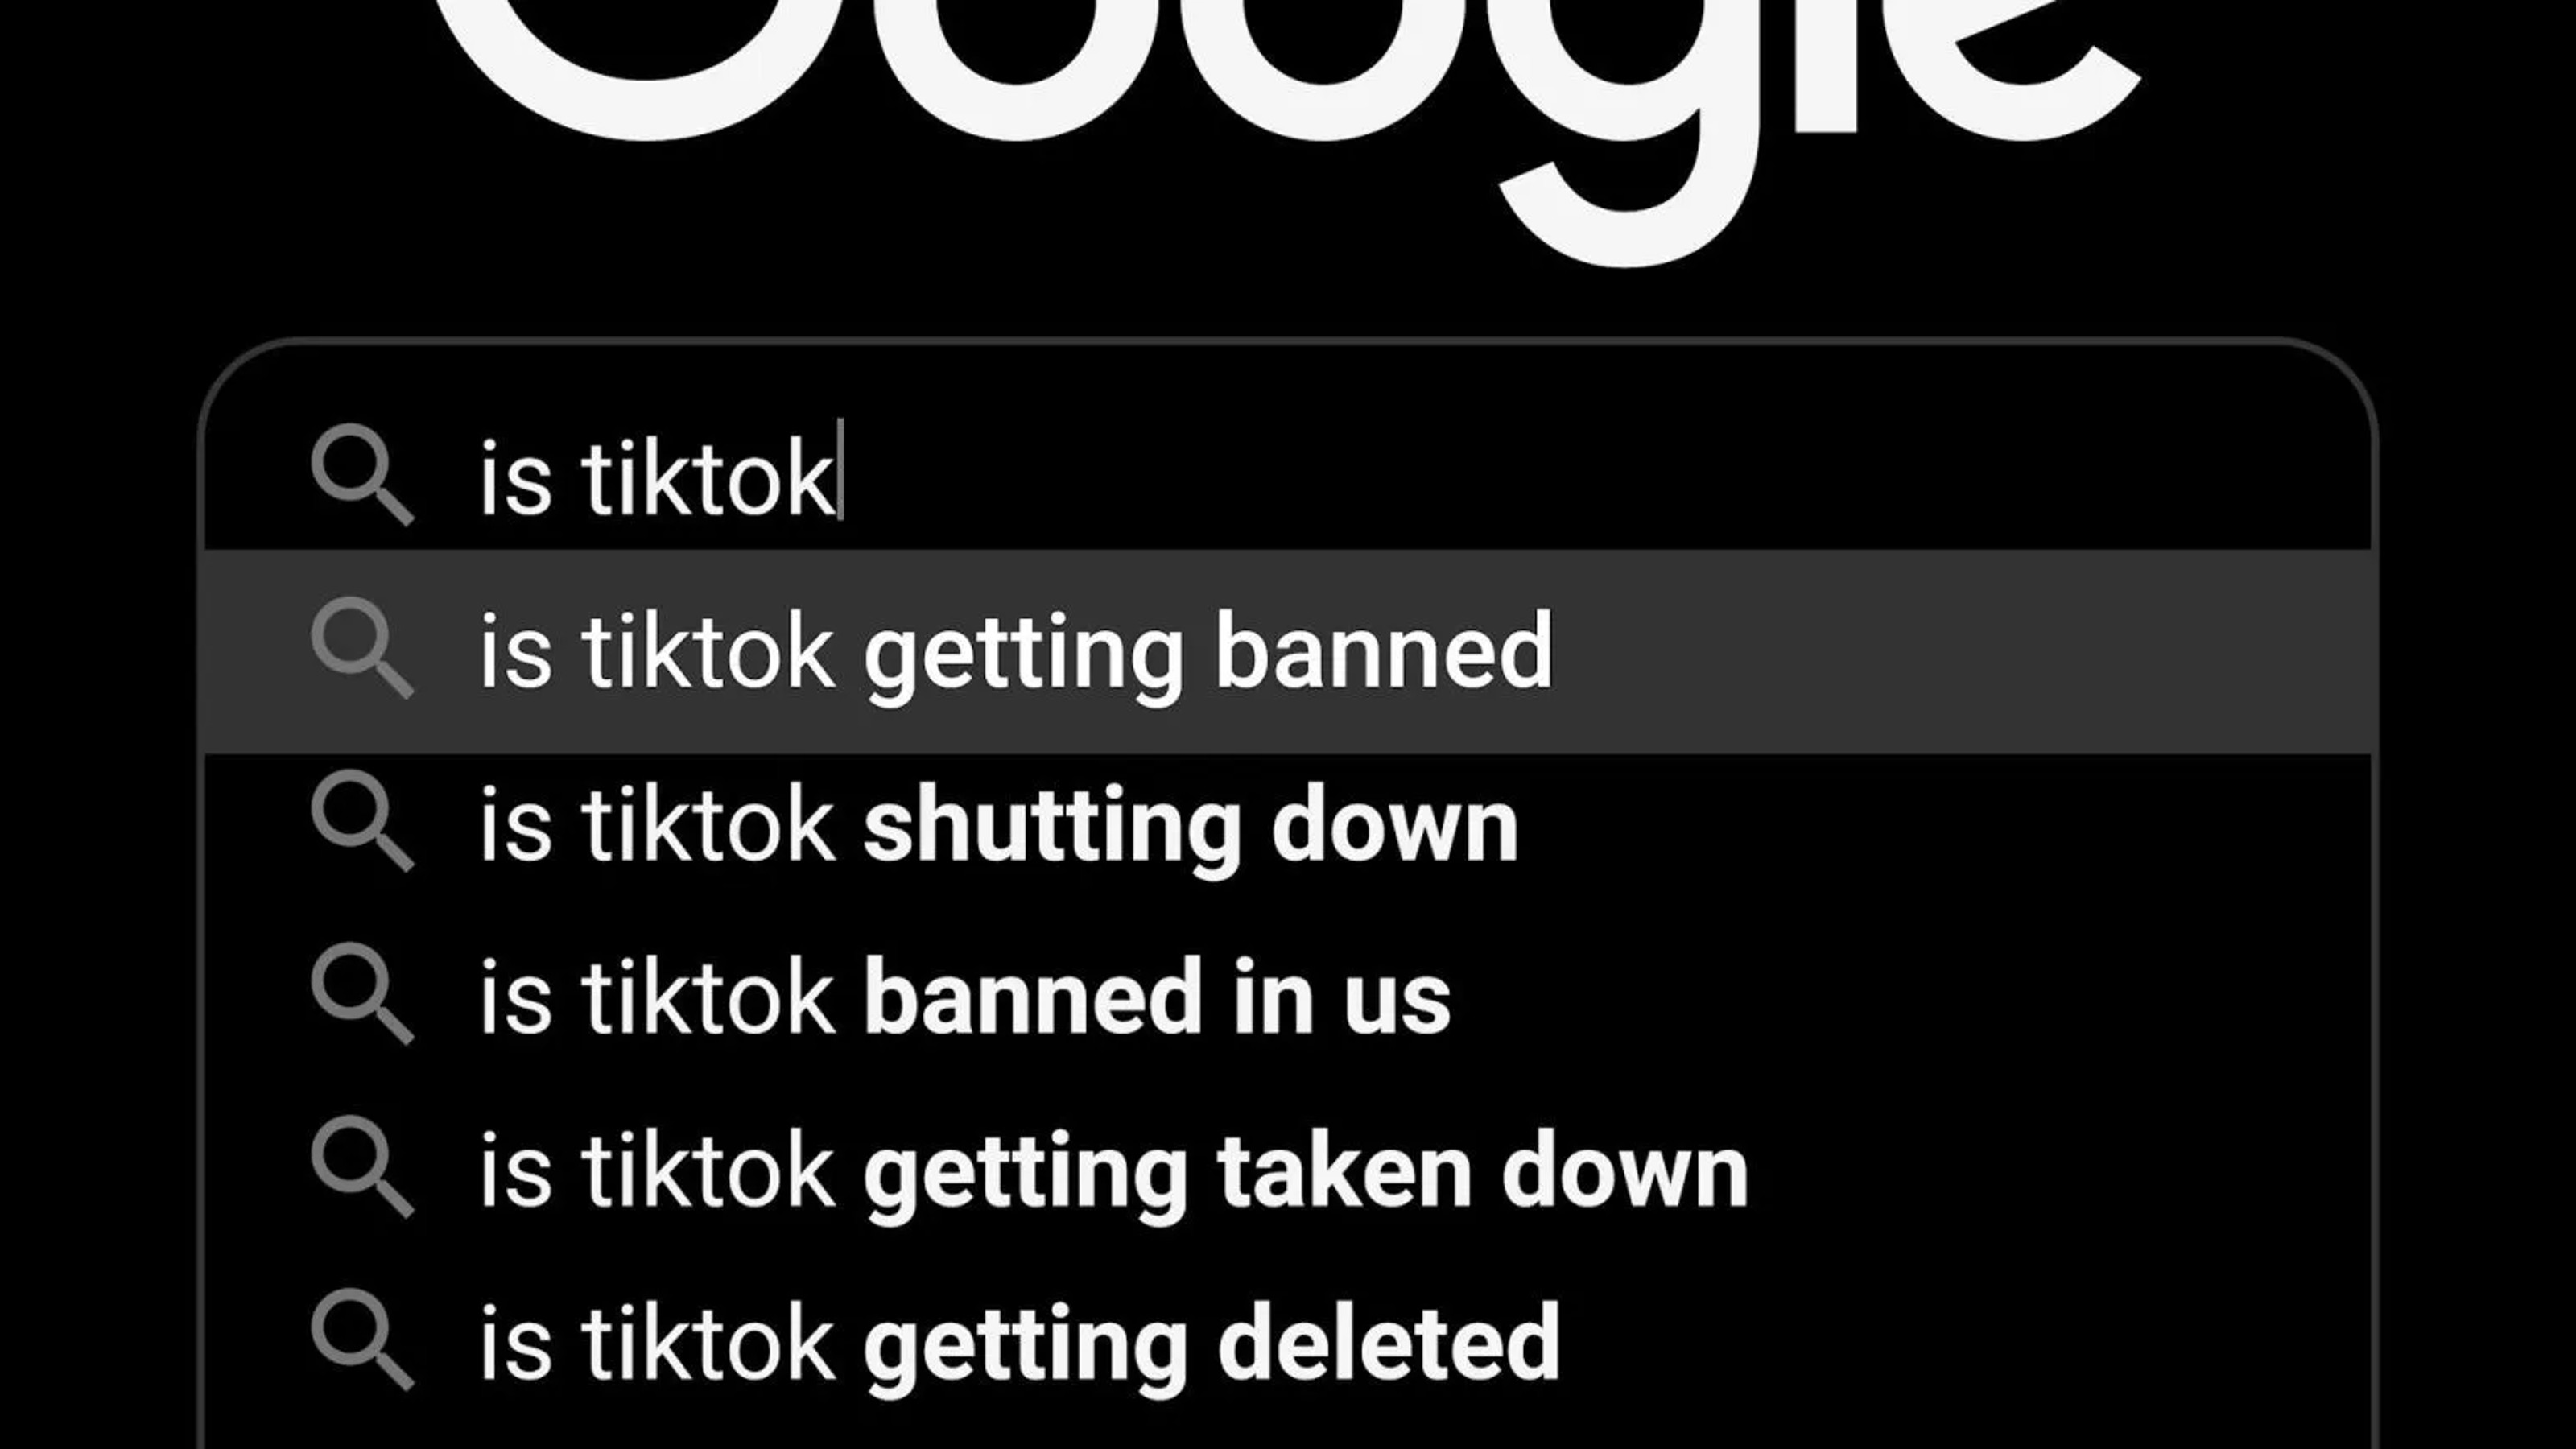 Google search bar with queries related to TikTok, including "is tiktok getting banned," "is tiktok shutting down," and "is tiktok banned in us.